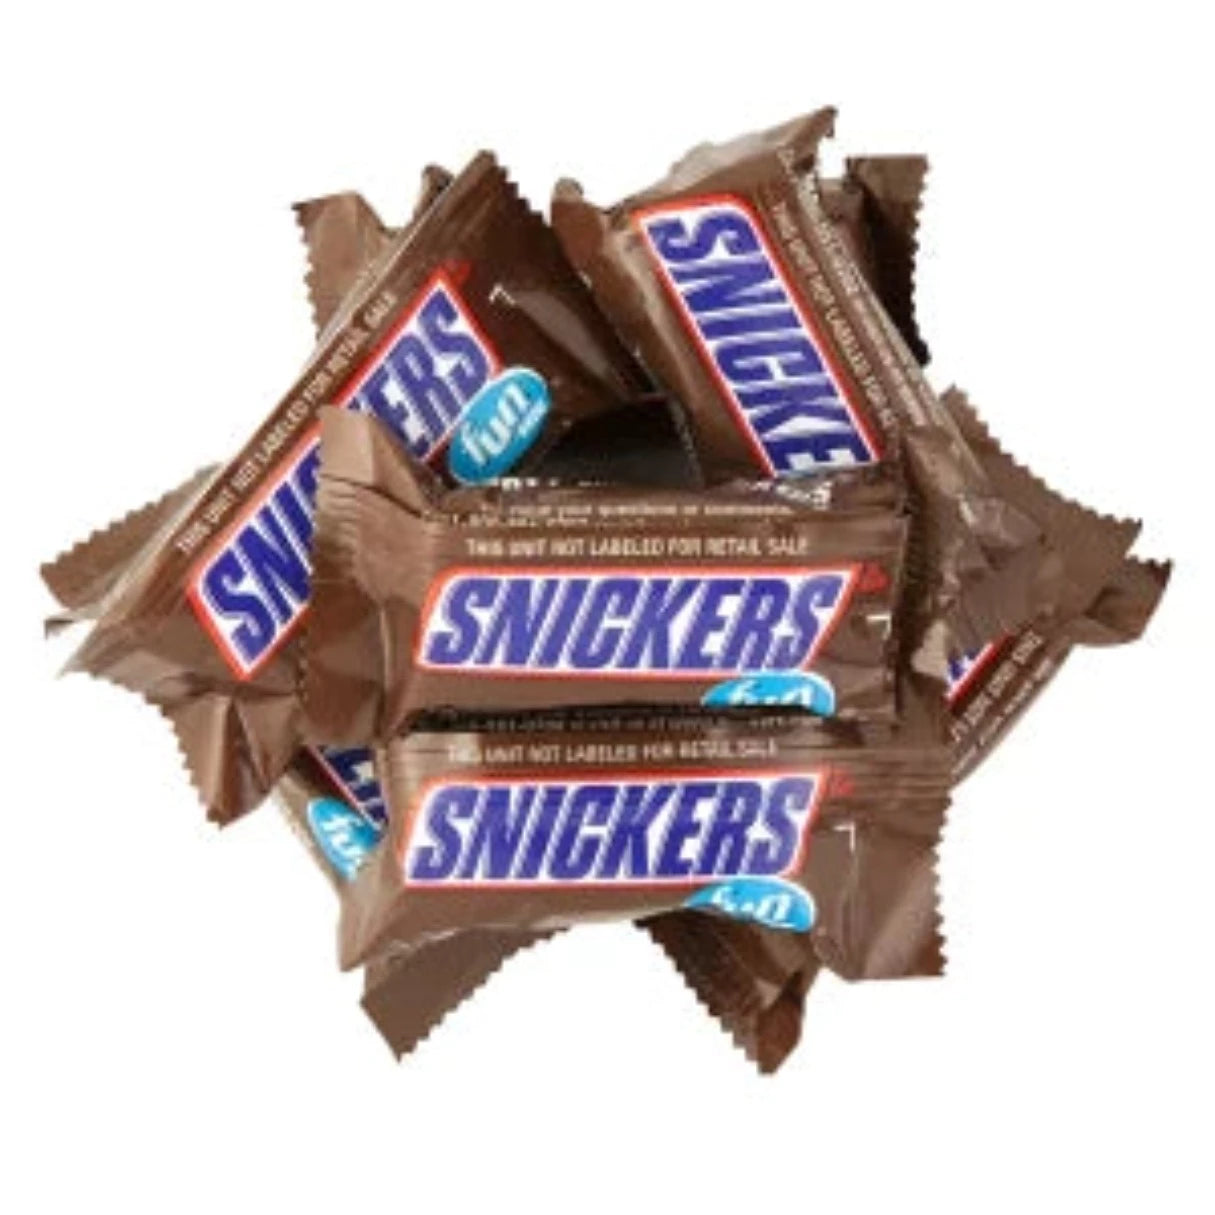 Snickers Fun Size Chocolate Candy, 10.59 oz.